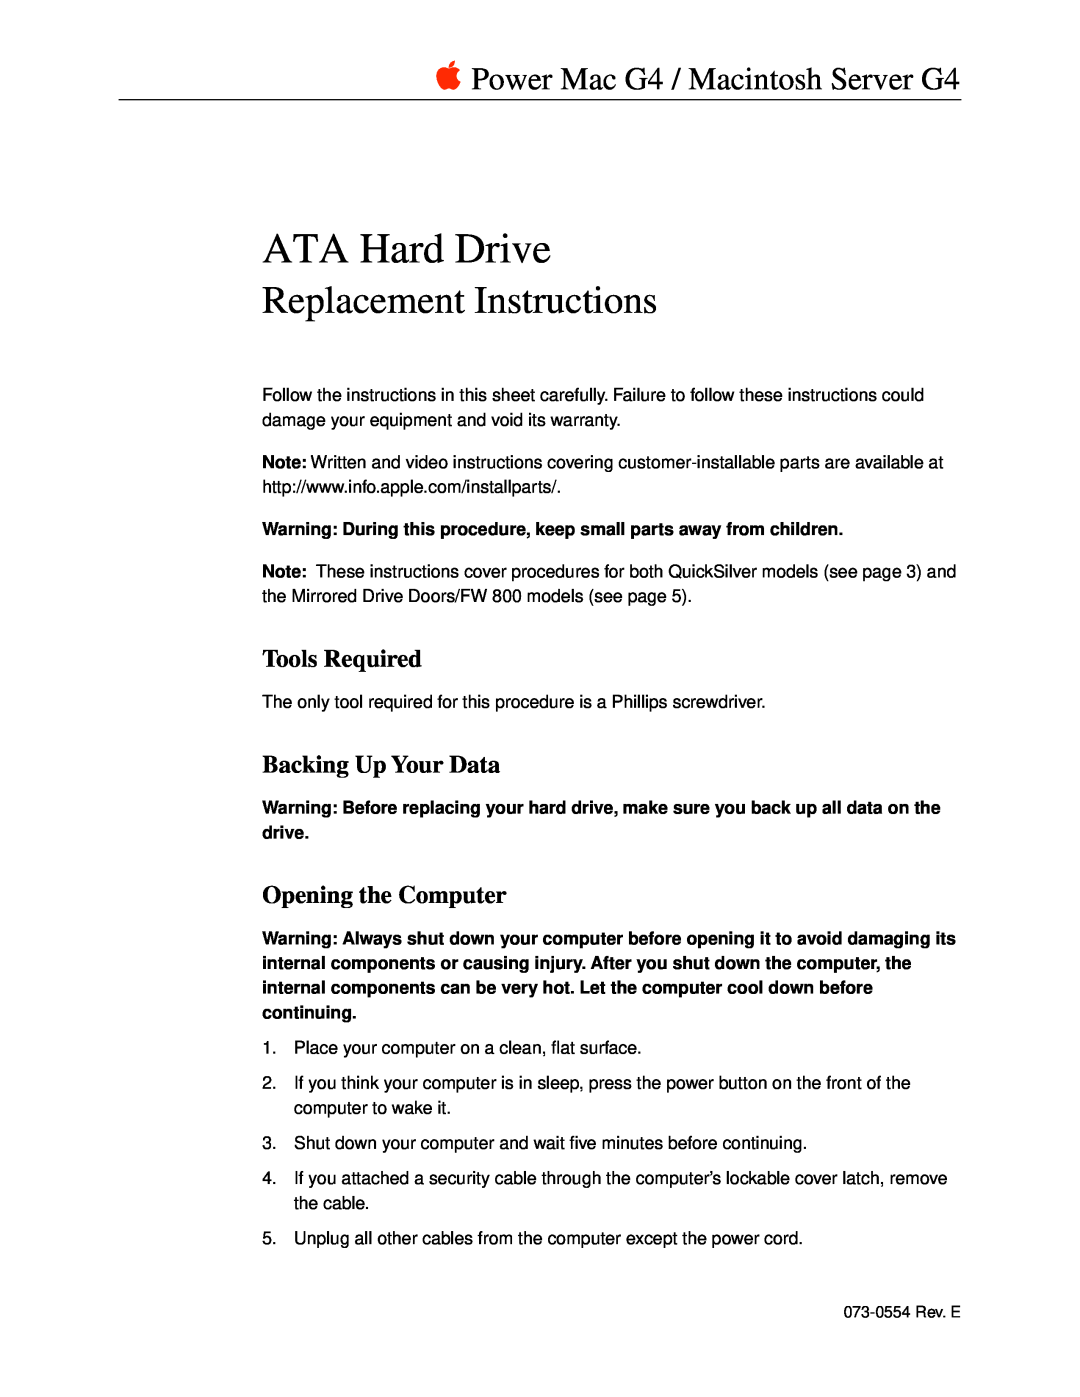 Apple ATA Hard Drive warranty Tools Required, Backing Up Your Data, Opening the Computer, Replacement Instructions 